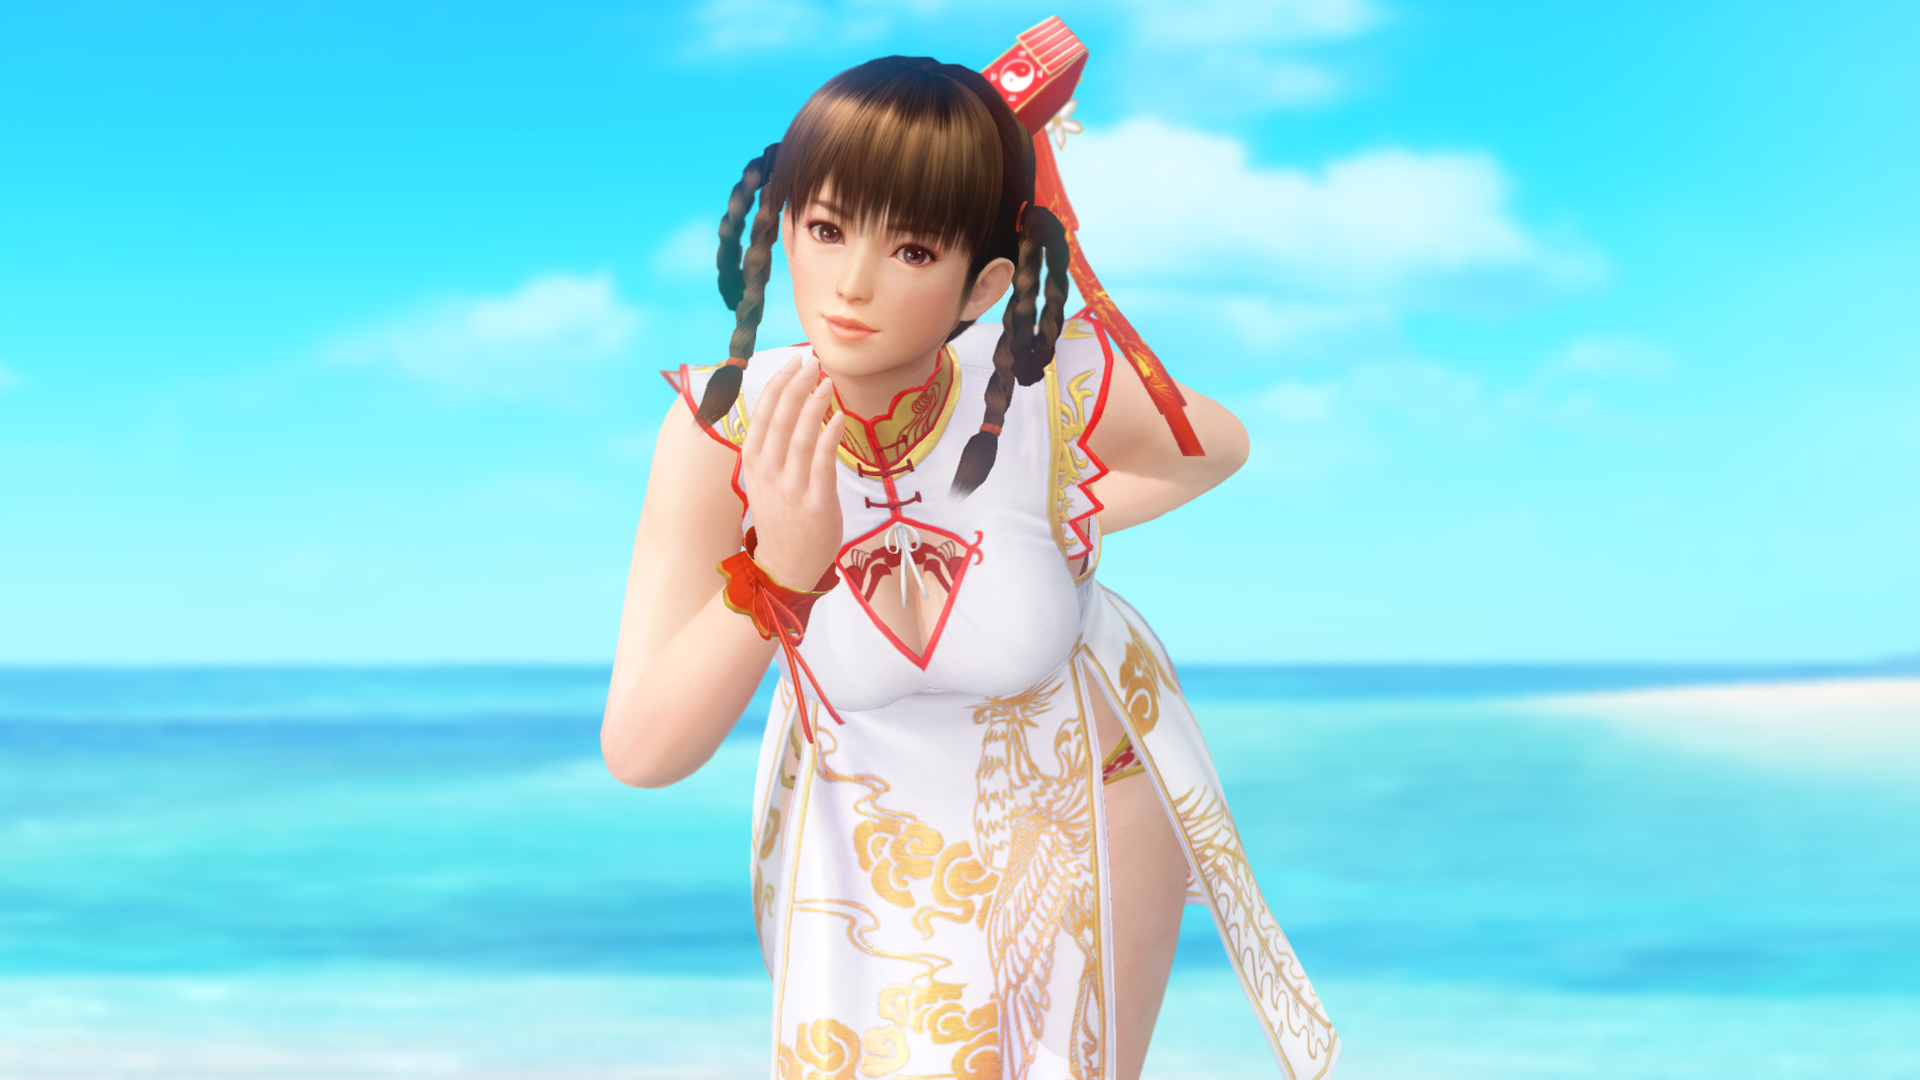 Dead or Alive Xtreme 3's Keijo! Crossover Shown in Video - Interest - Anime  News Network